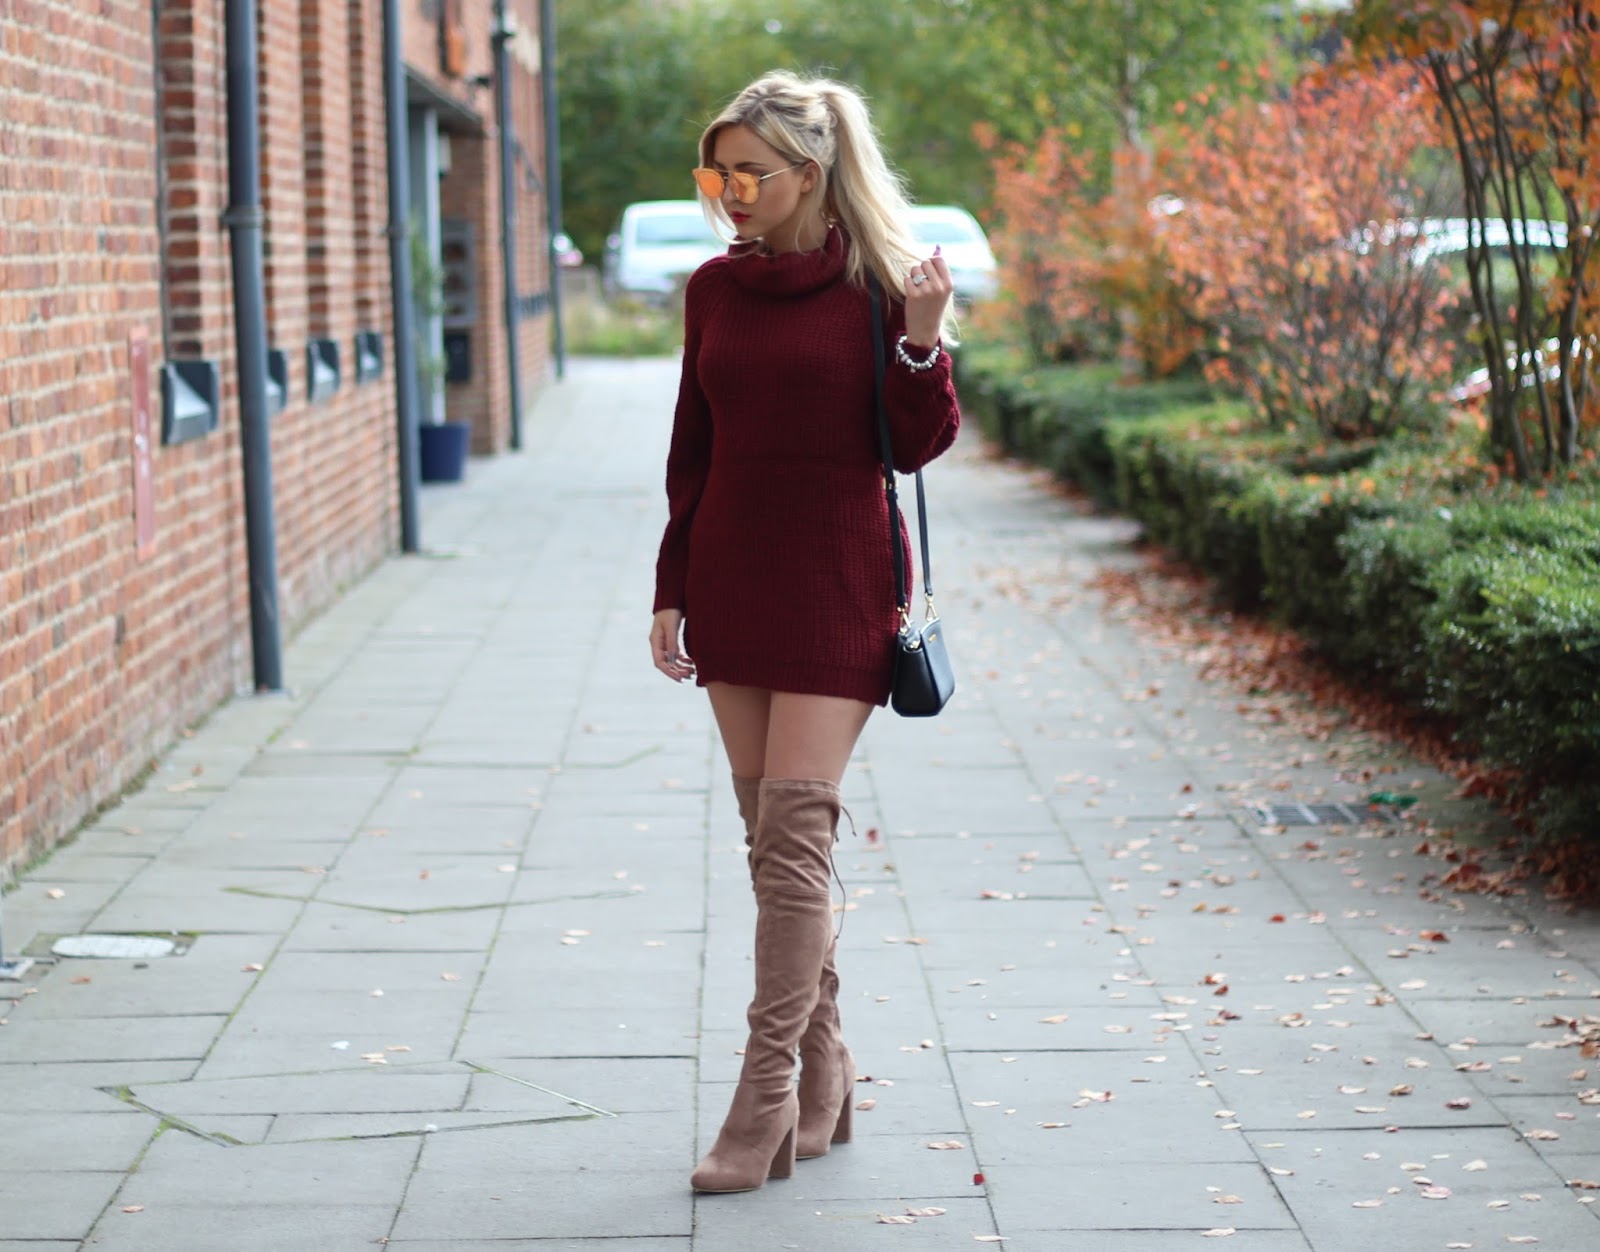 Autumn Style Jumper Dresses & Knee High Boots Couture Girl